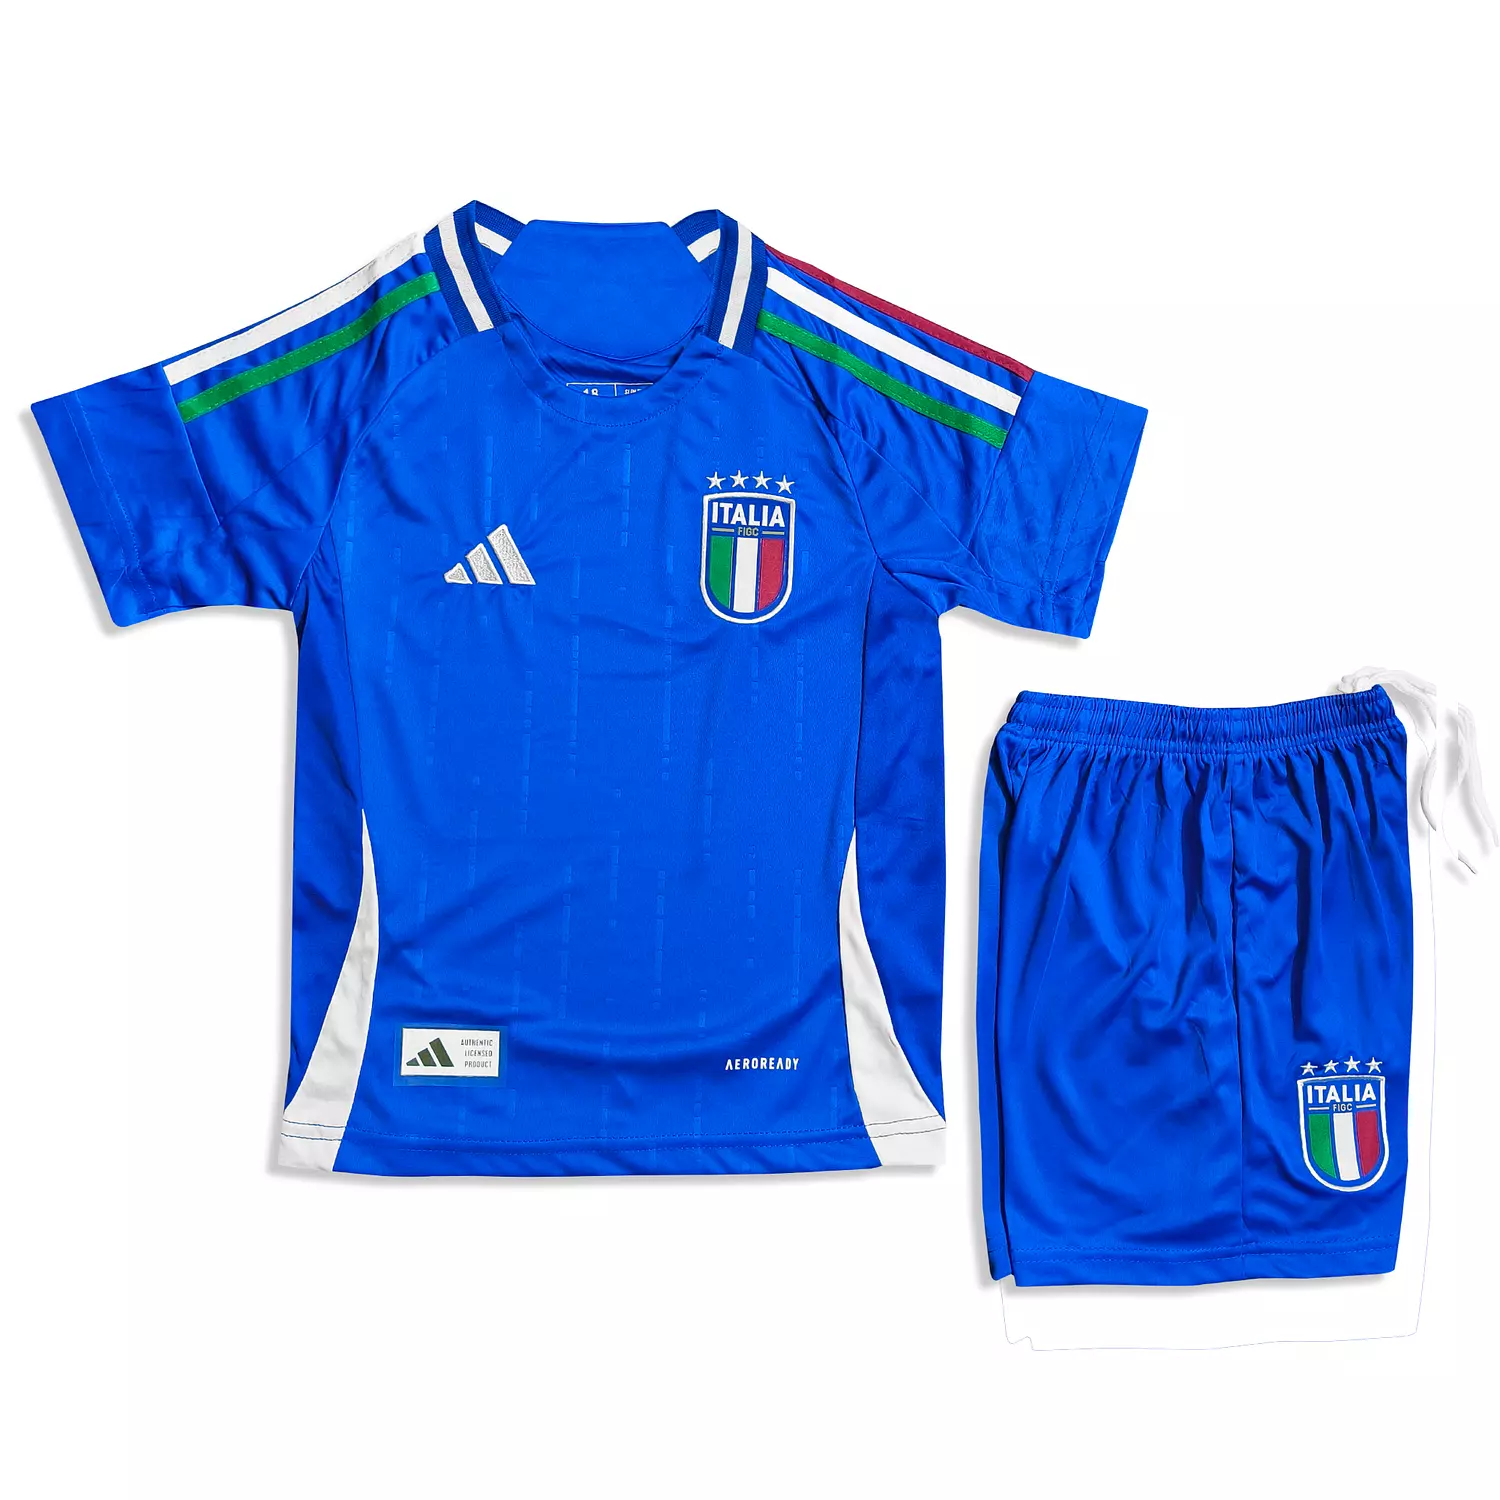 ITALY EURO 24 - KIDS hover image